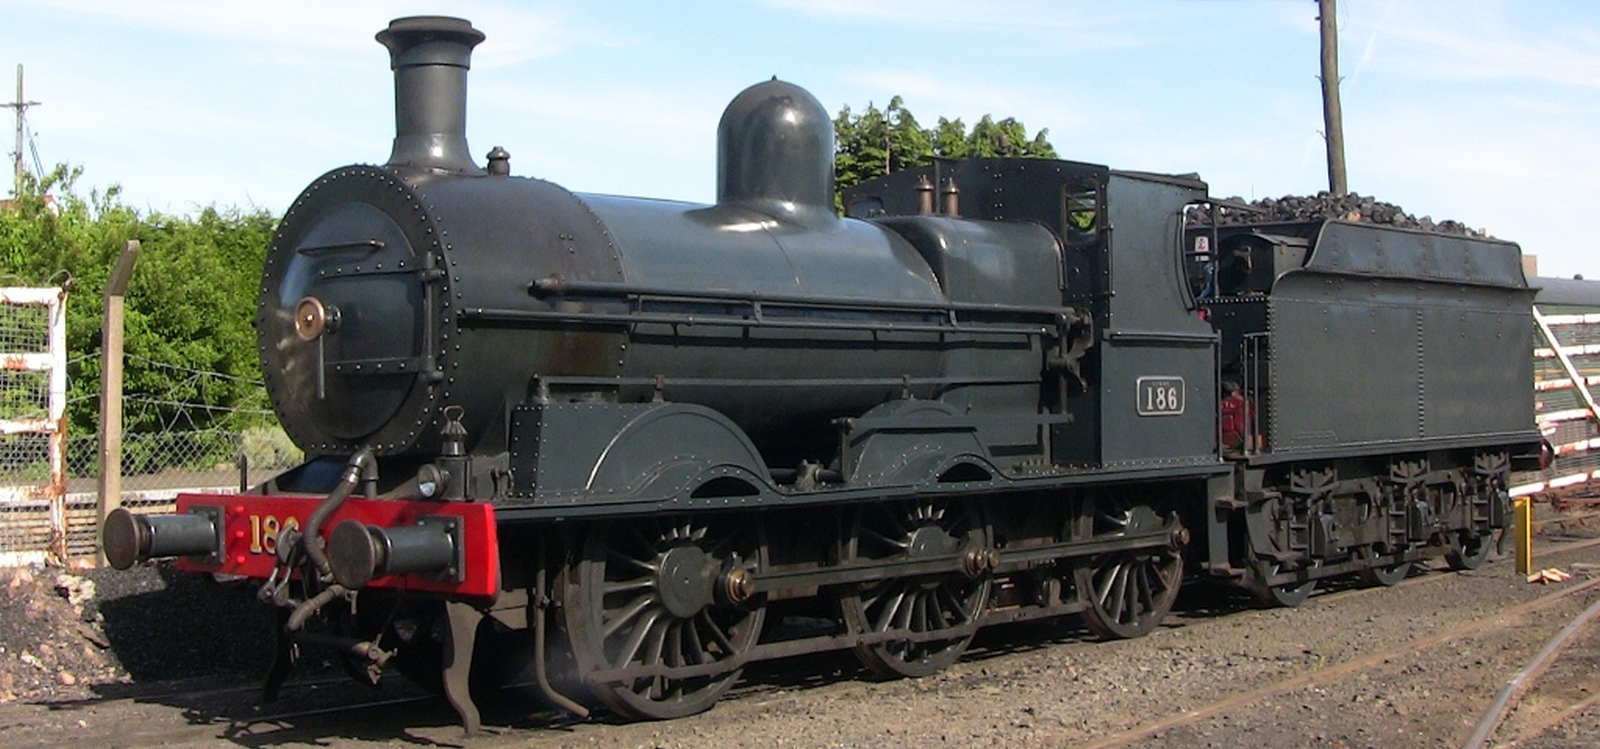 No. 186 with Belpaire firebox and superheater in June 2010 at Whitehead, Antrim